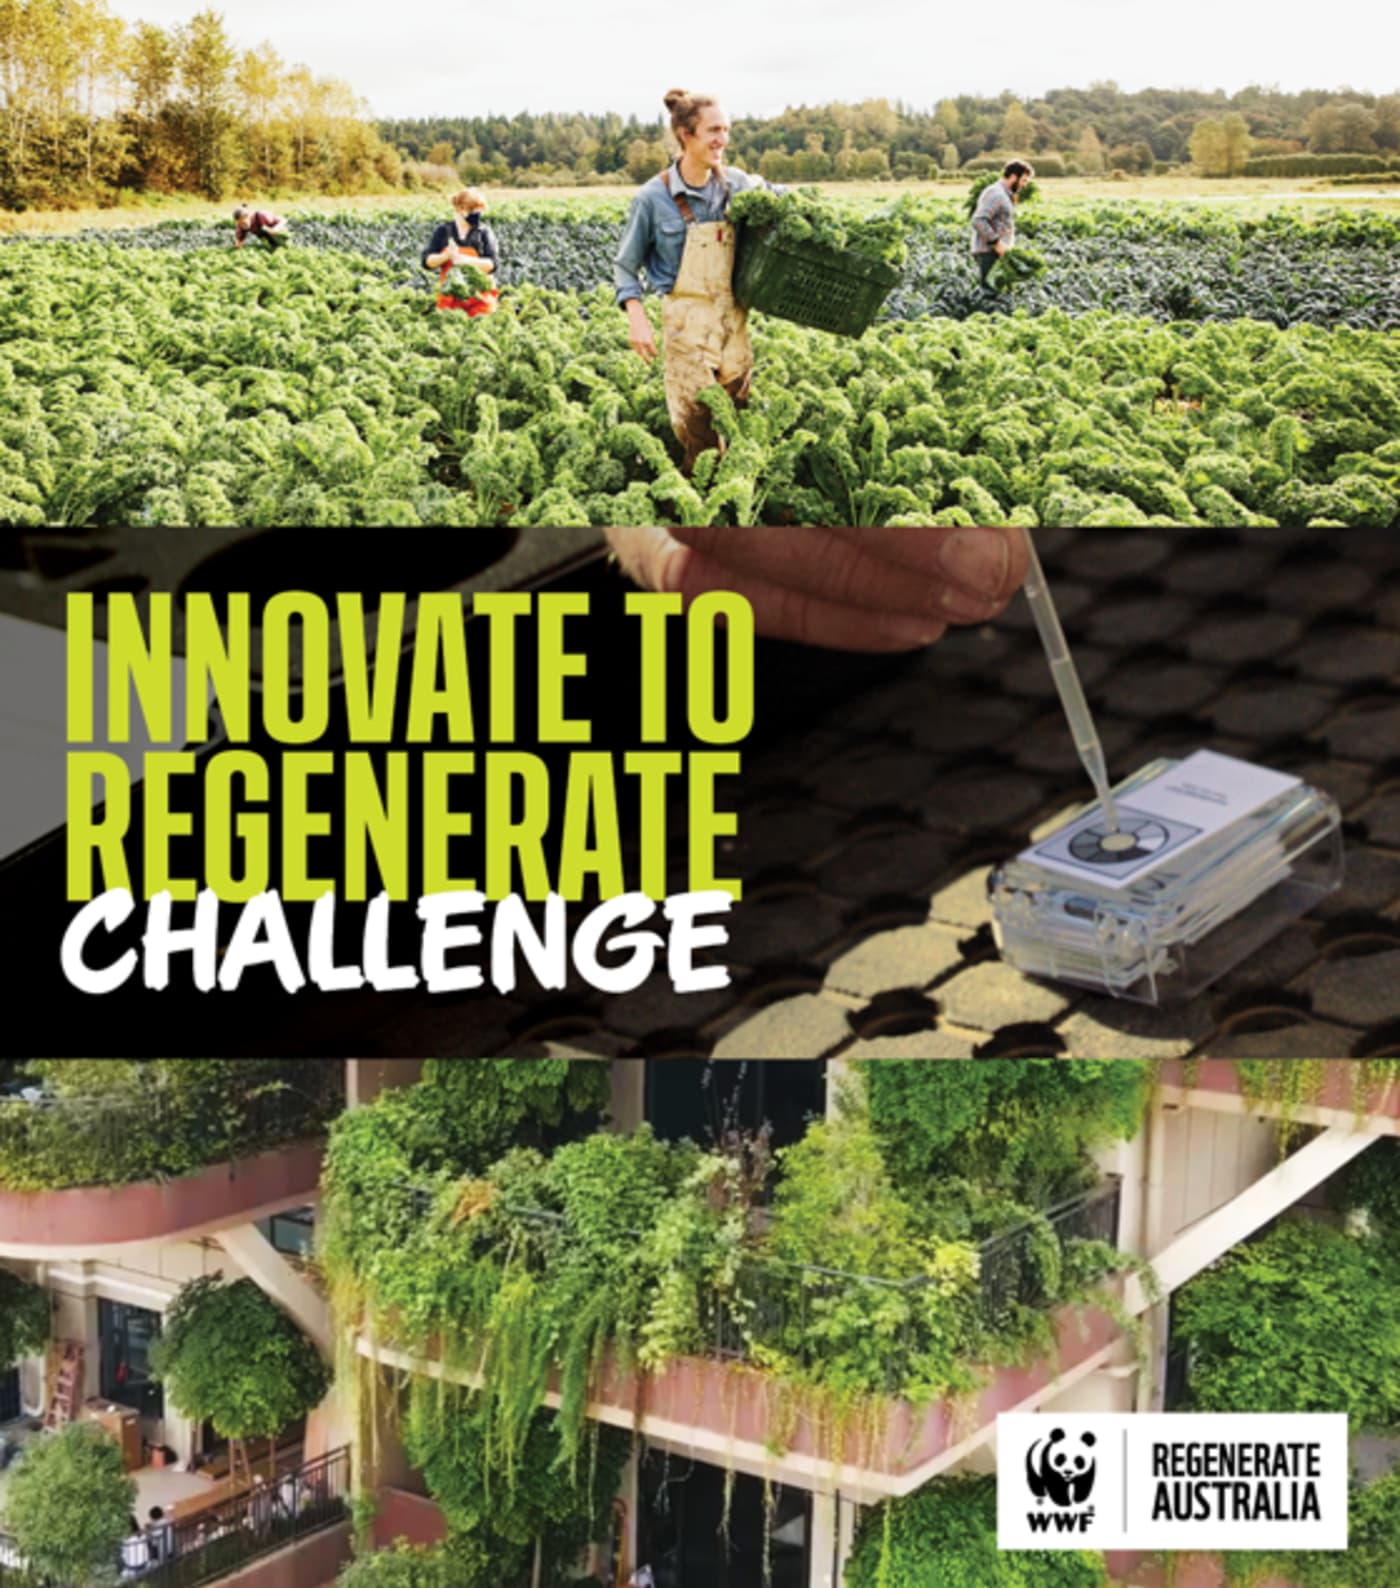 Innovate to regenerate banner